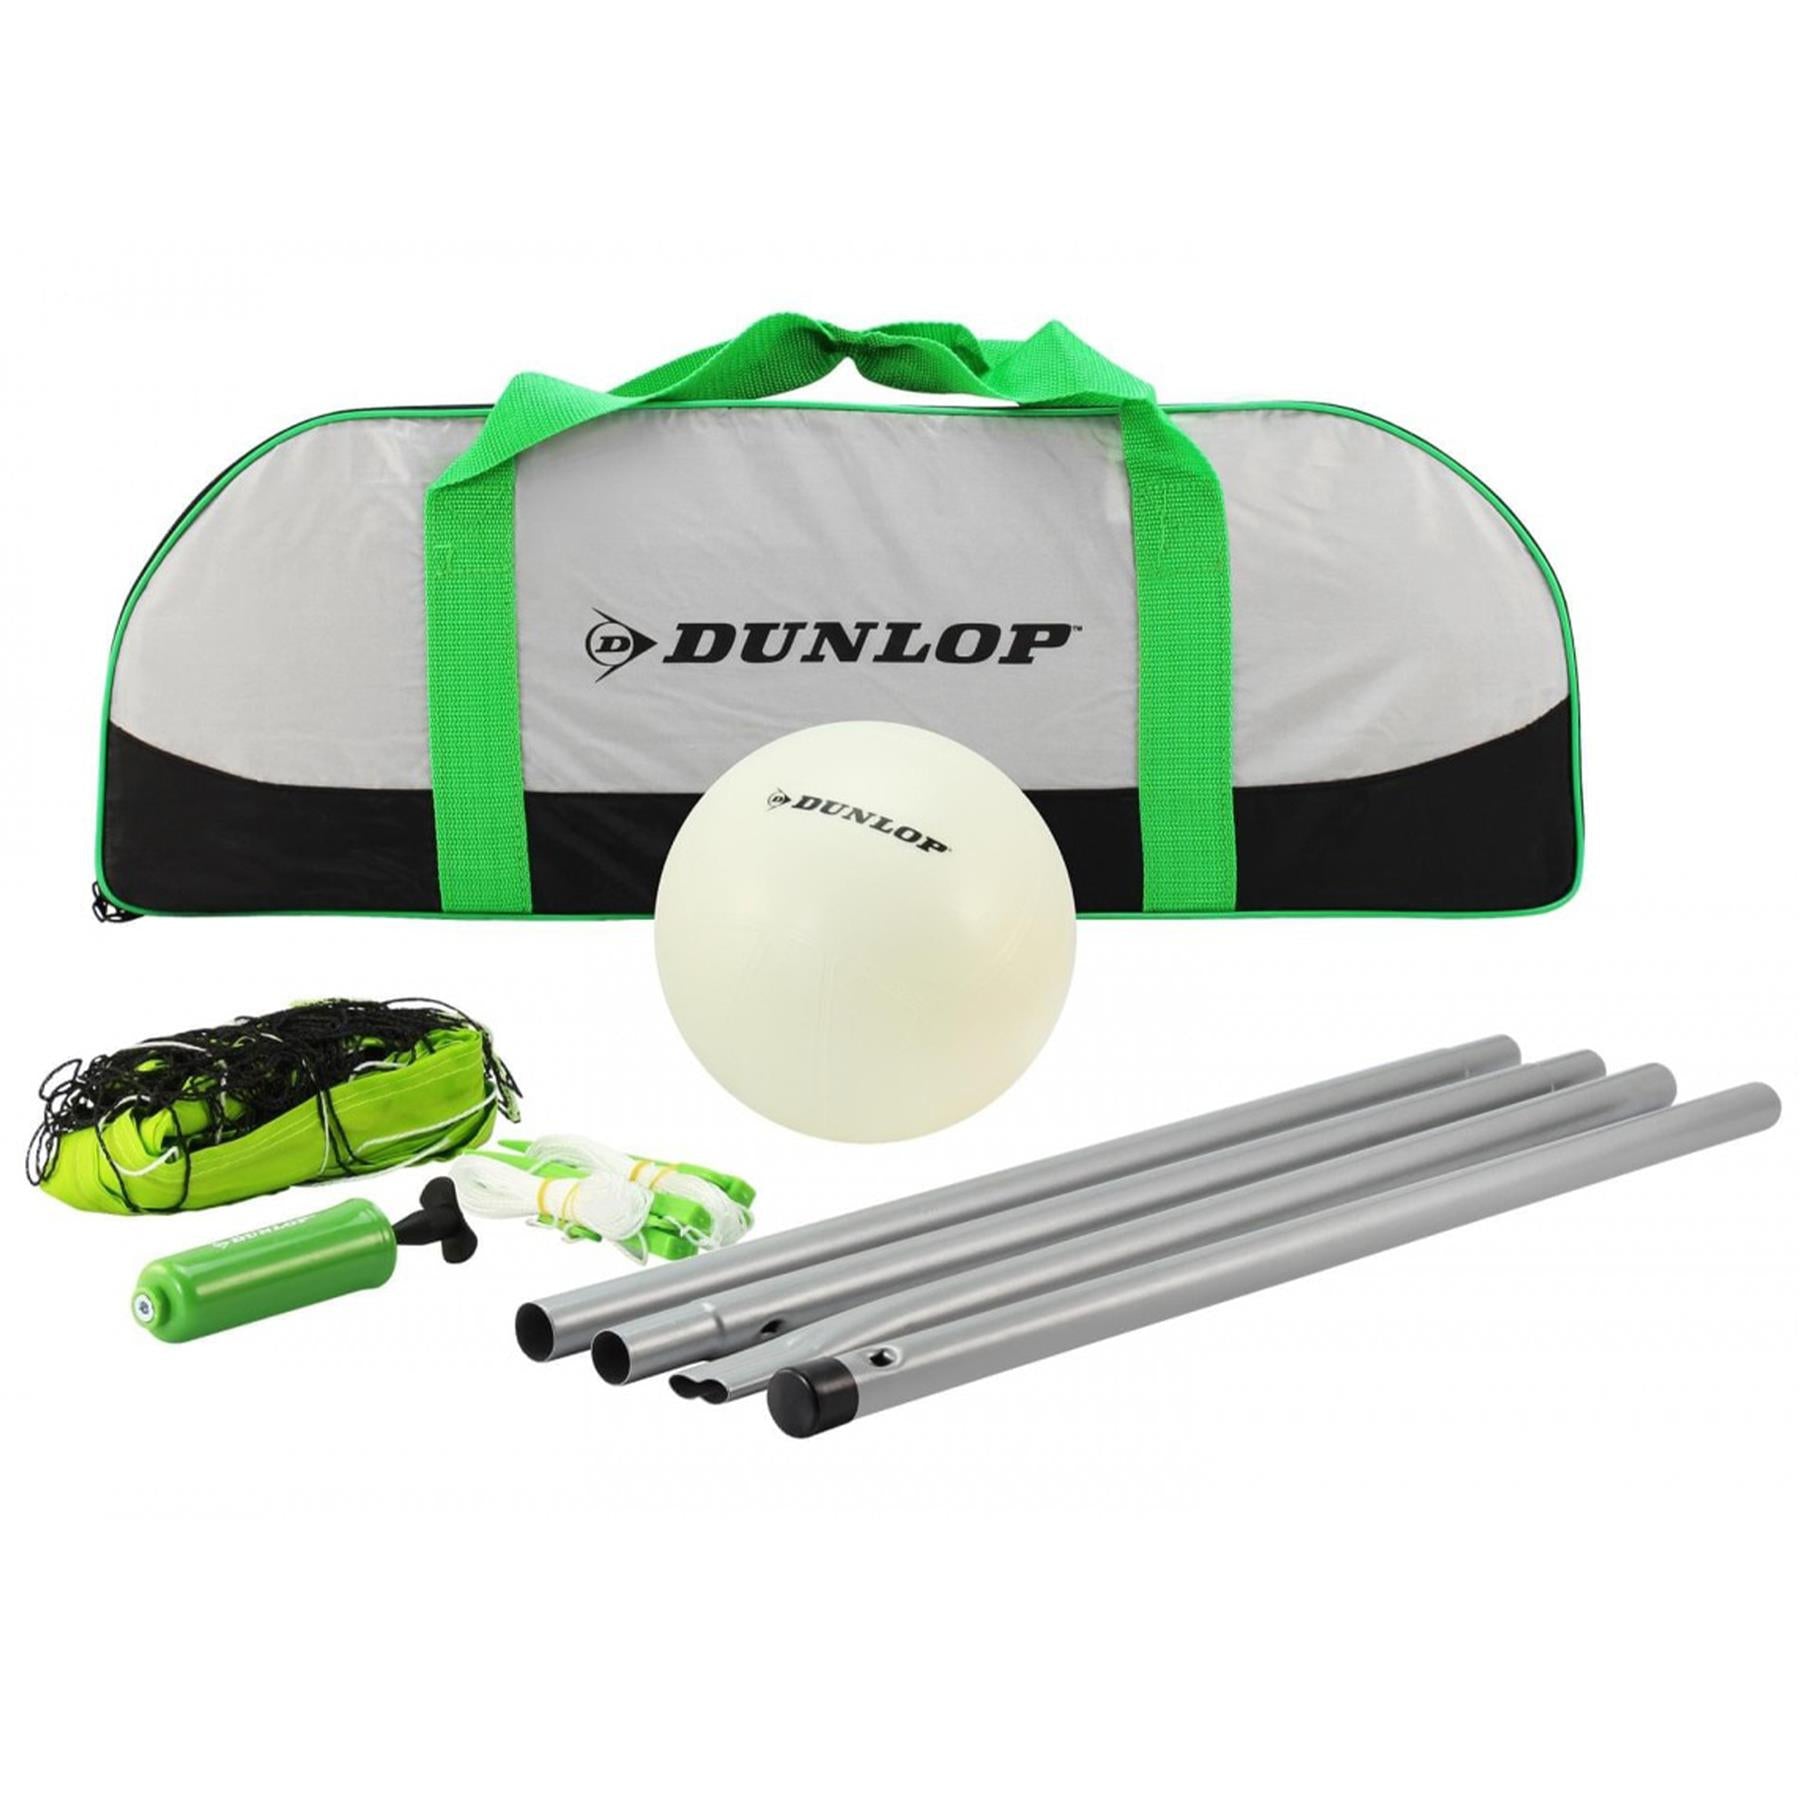 Dunlop Volleyball Set with Pump, Ball and Carry Bag by The Magic Toy Shop - The Magic Toy Shop